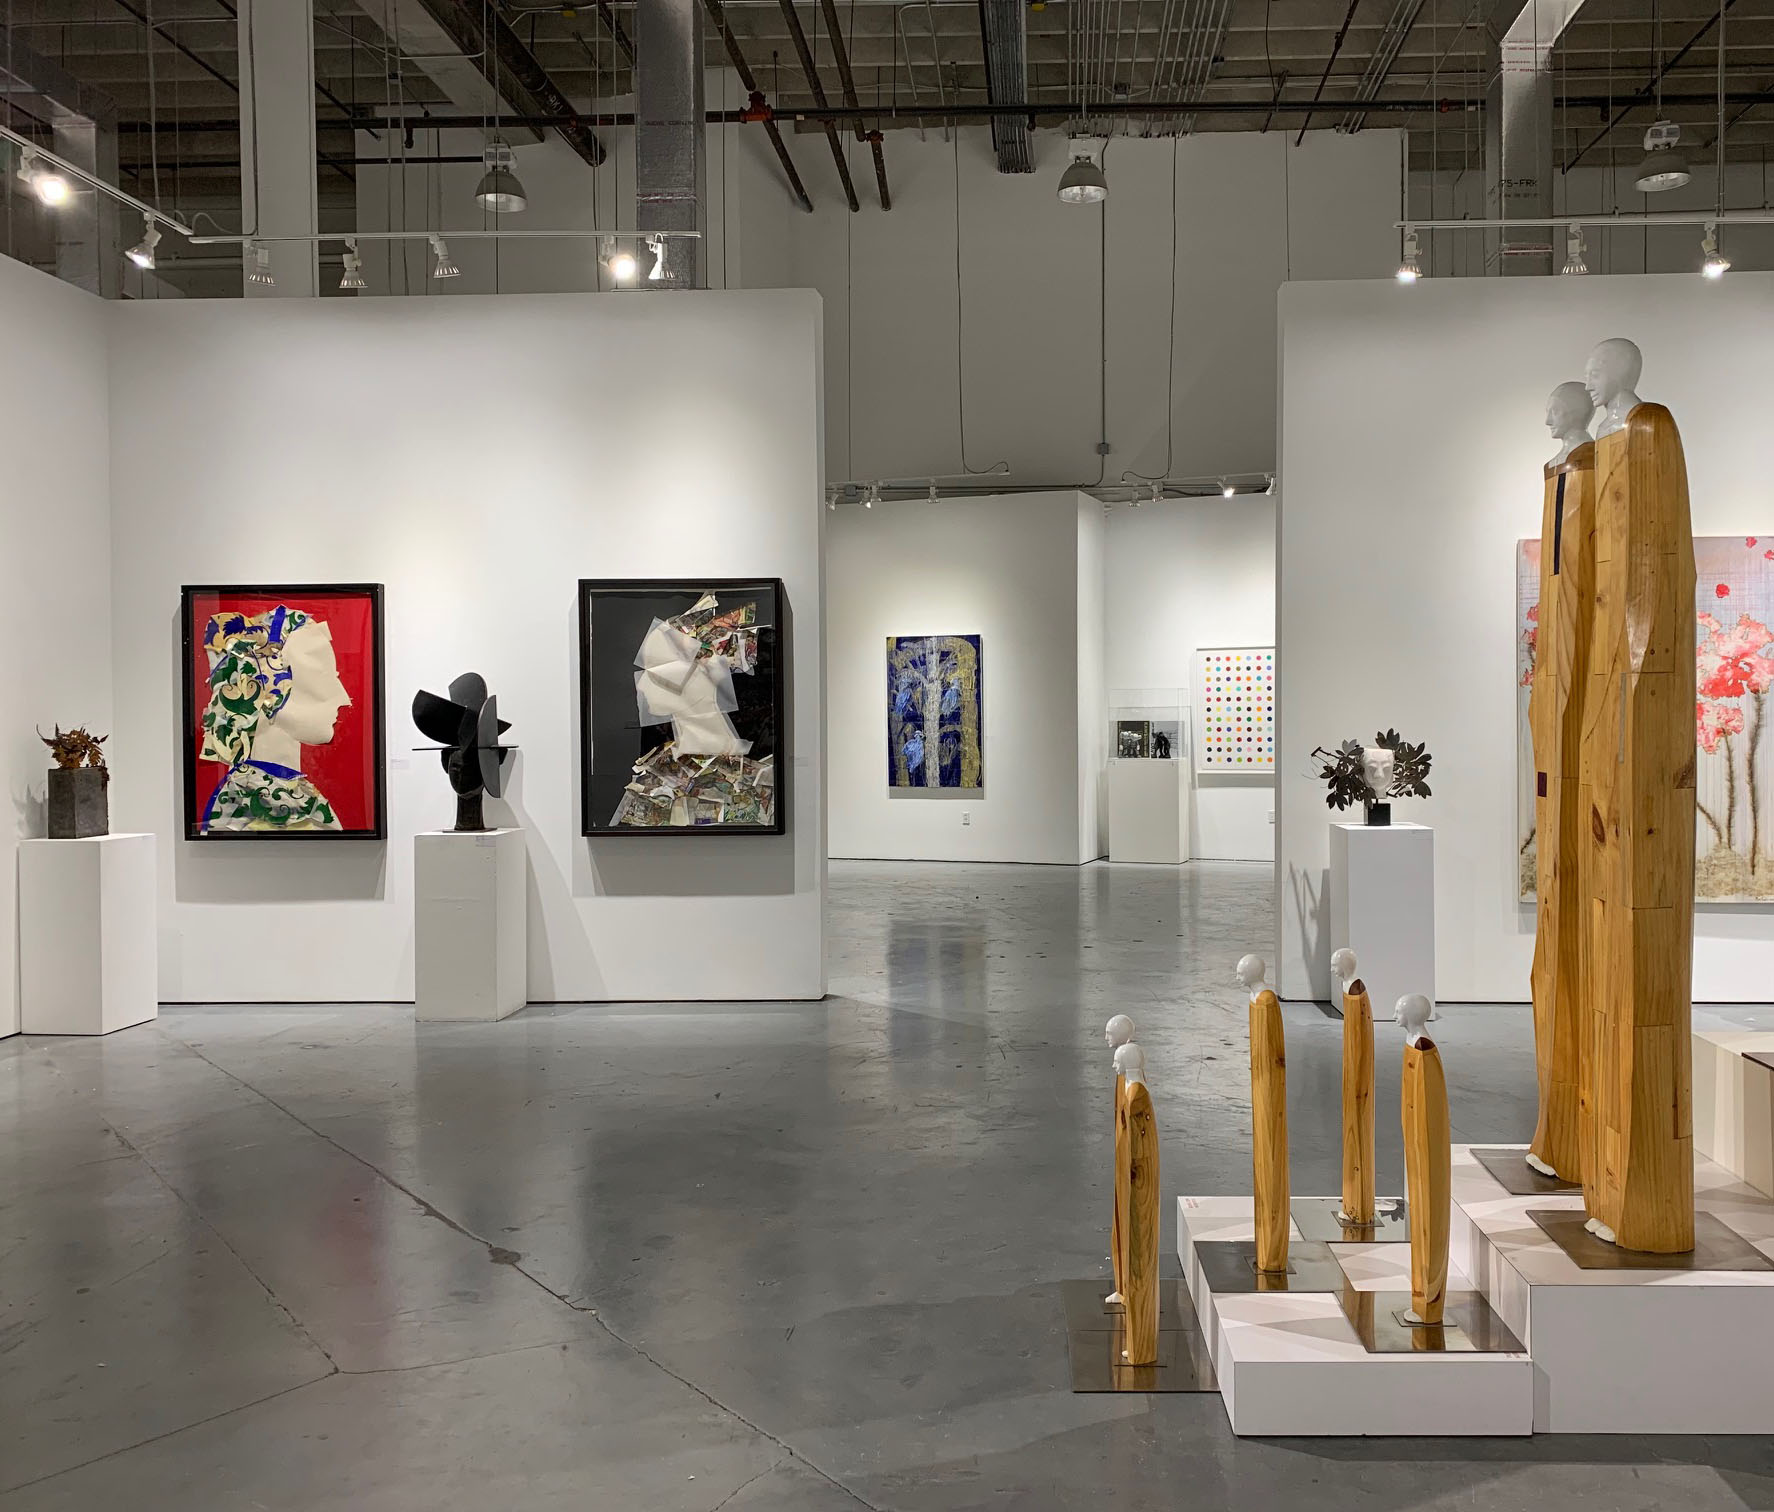 Overview of Summer Selections exhibition at Rosenbaum Contemporary. Includes work by Manolo Valdés, Hunt Slonem, Oriano Galloni, KAWS, Damien Hirst and Mira Lehr.